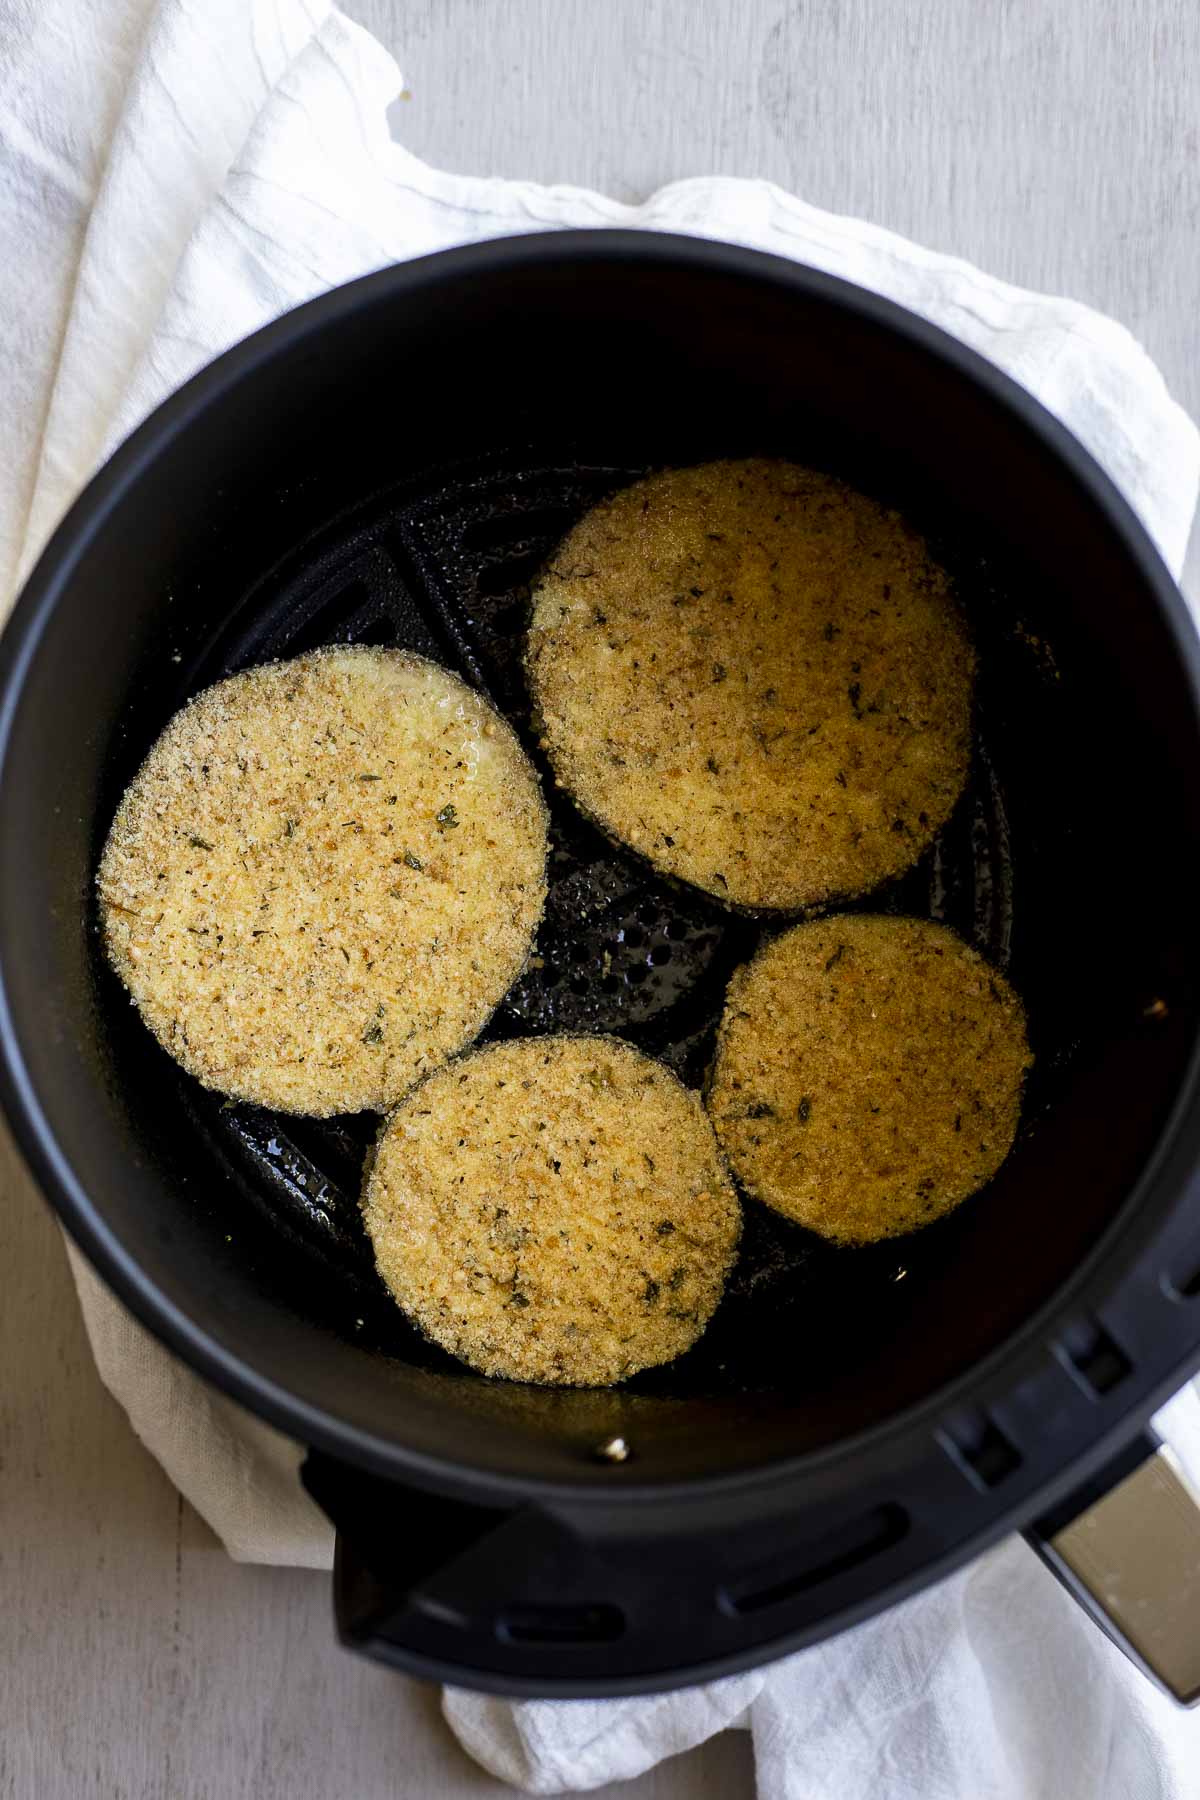 Four slices of breaded eggplant in an air fryer basket.